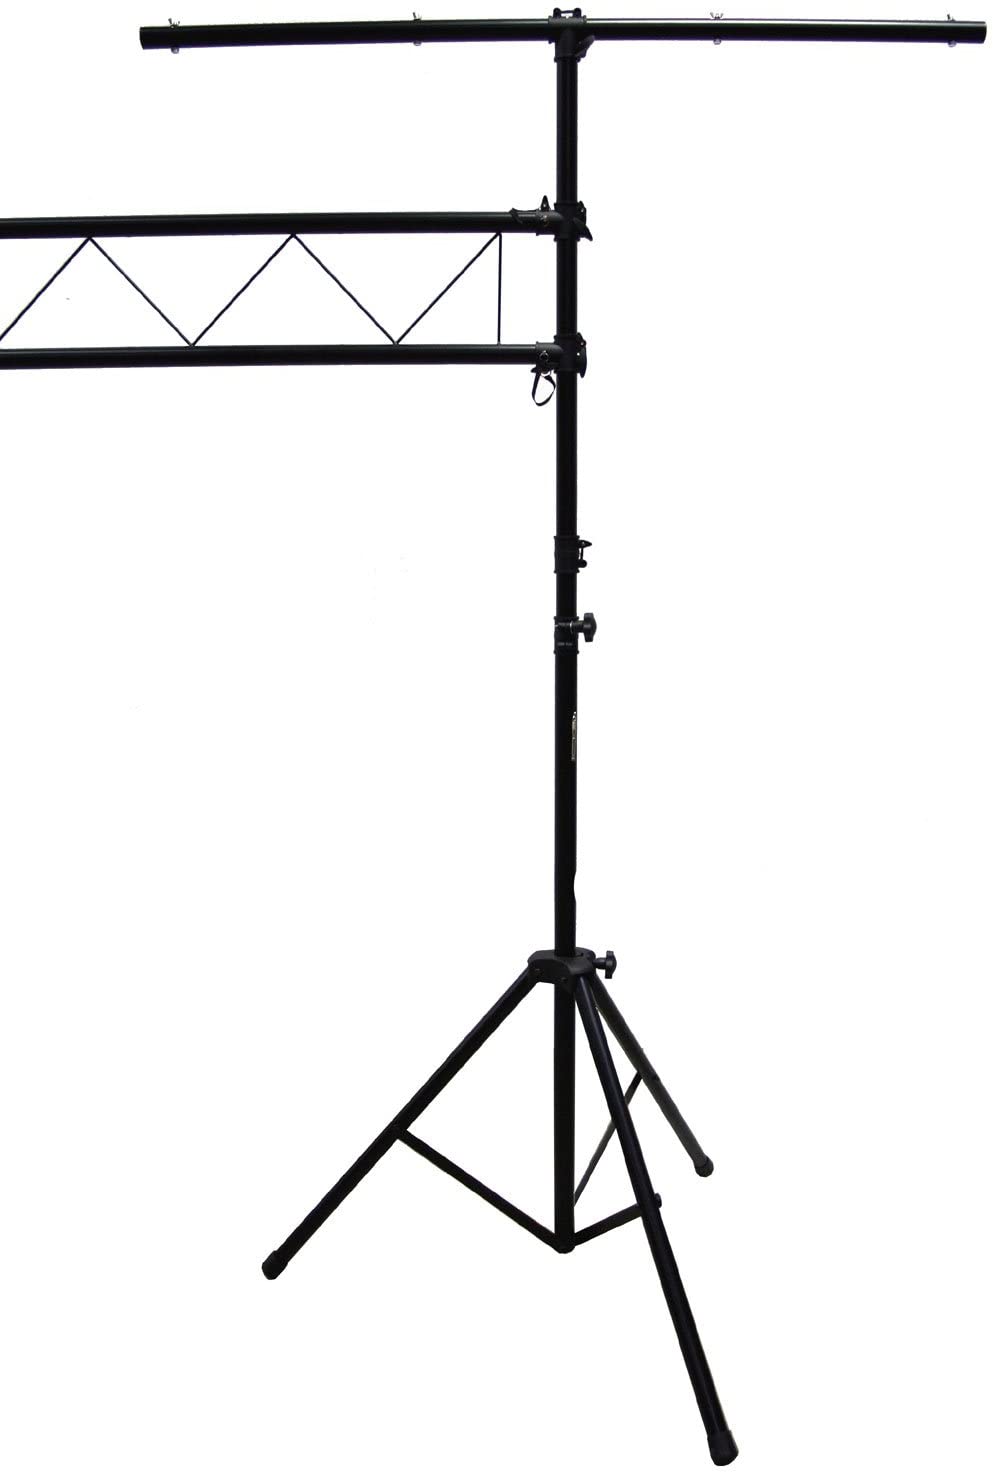 MR DJ LS560 10 Feet Lighting Stand Mobile Portable Dj Band PRO Audio PA DJ Light Lighting Stage Fixture Truss Stand with T-Bar Trussing Stage System